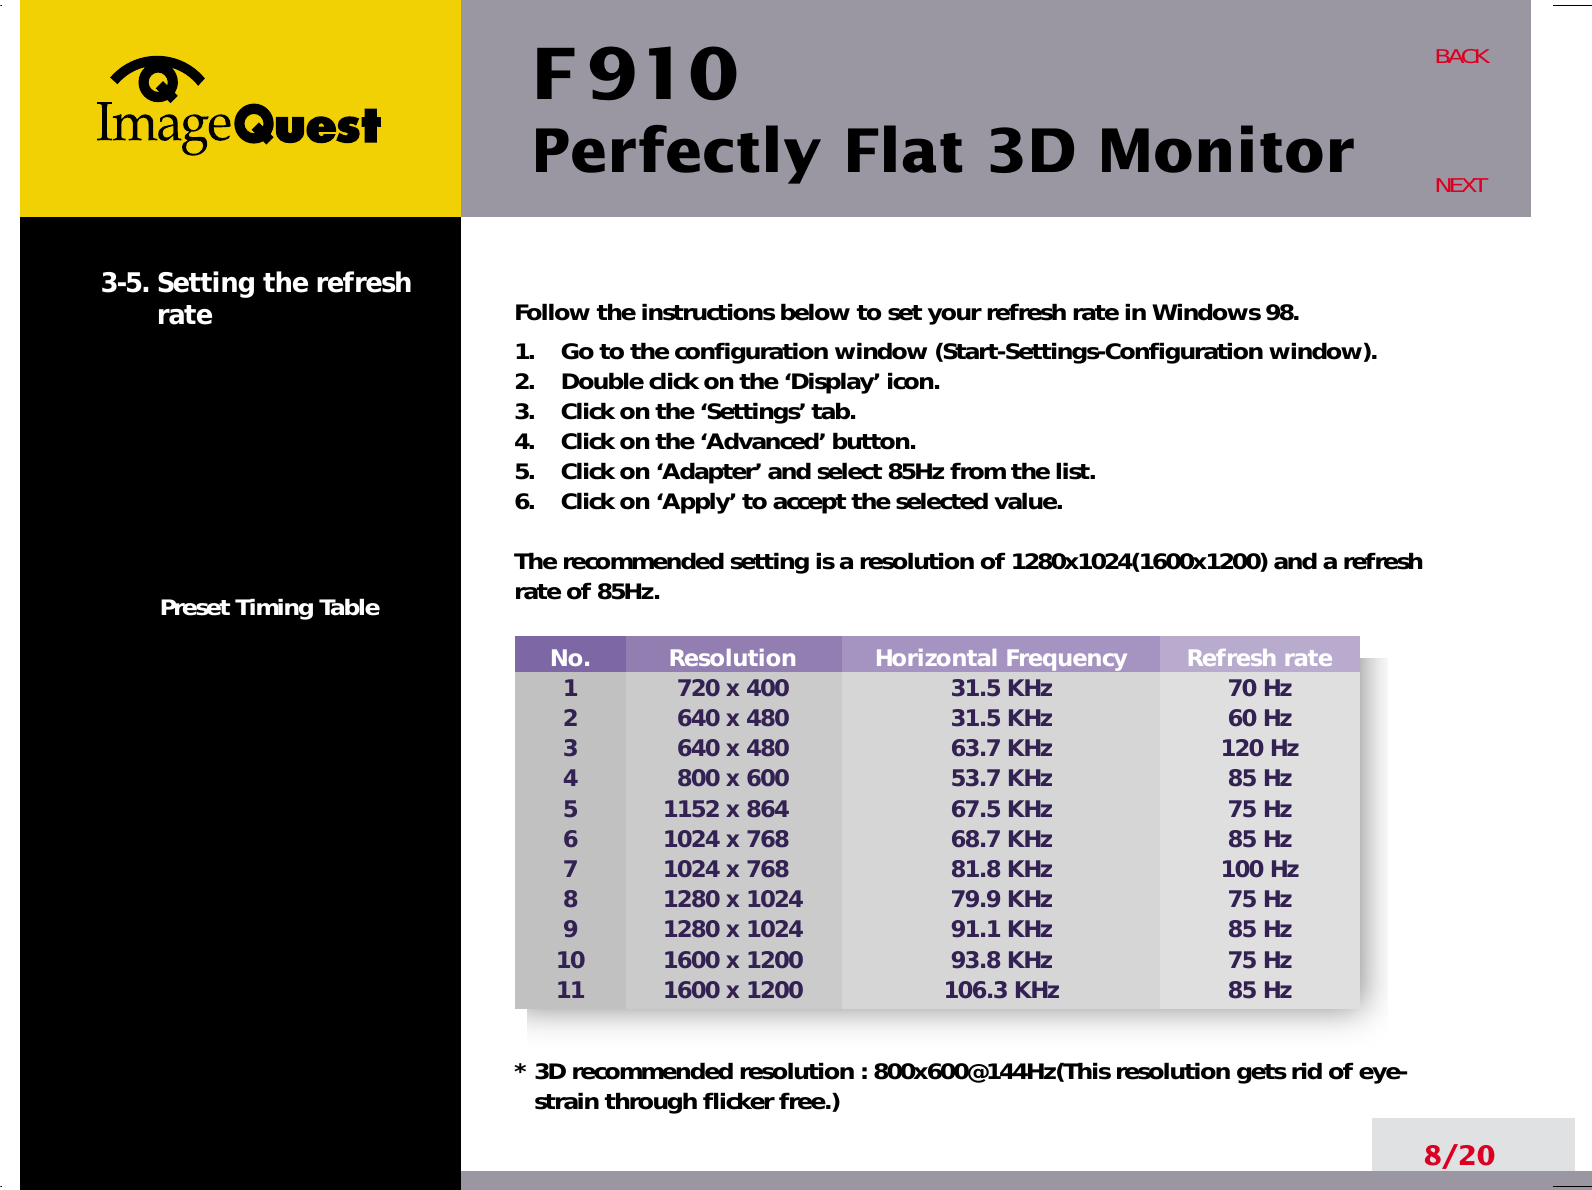 F 910Perfectly Flat 3D Monitor8/20BACKNEXT3-5. Setting the refreshratePreset Timing TableFollow the instructions below to set your refresh rate in Windows 98.1.    Go to the configuration window (Start-Settings-Configuration window).2.    Double click on the ‘Display’ icon.3.    Click on the ‘Settings’ tab.4.    Click on the ‘Advanced’ button.5.    Click on ‘Adapter’ and select 85Hz from the list.6.    Click on ‘Apply’ to accept the selected value.The recommended setting is a resolution of 1280x1024(1600x1200) and a refreshrate of 85Hz.* 3D recommended resolution : 800x600@144Hz(This resolution gets rid of eye- strain through flicker free.)No.1234567891011Resolution720 x 400640 x 480640 x 480800 x 6001152 x 8641024 x 7681024 x 7681280 x 10241280 x 10241600 x 12001600 x 1200Horizontal Frequency31.5 KHz31.5 KHz63.7 KHz53.7 KHz67.5 KHz68.7 KHz81.8 KHz79.9 KHz91.1 KHz93.8 KHz106.3 KHzRefresh rate70 Hz60 Hz120 Hz85 Hz75 Hz85 Hz100 Hz75 Hz85 Hz75 Hz85 Hz